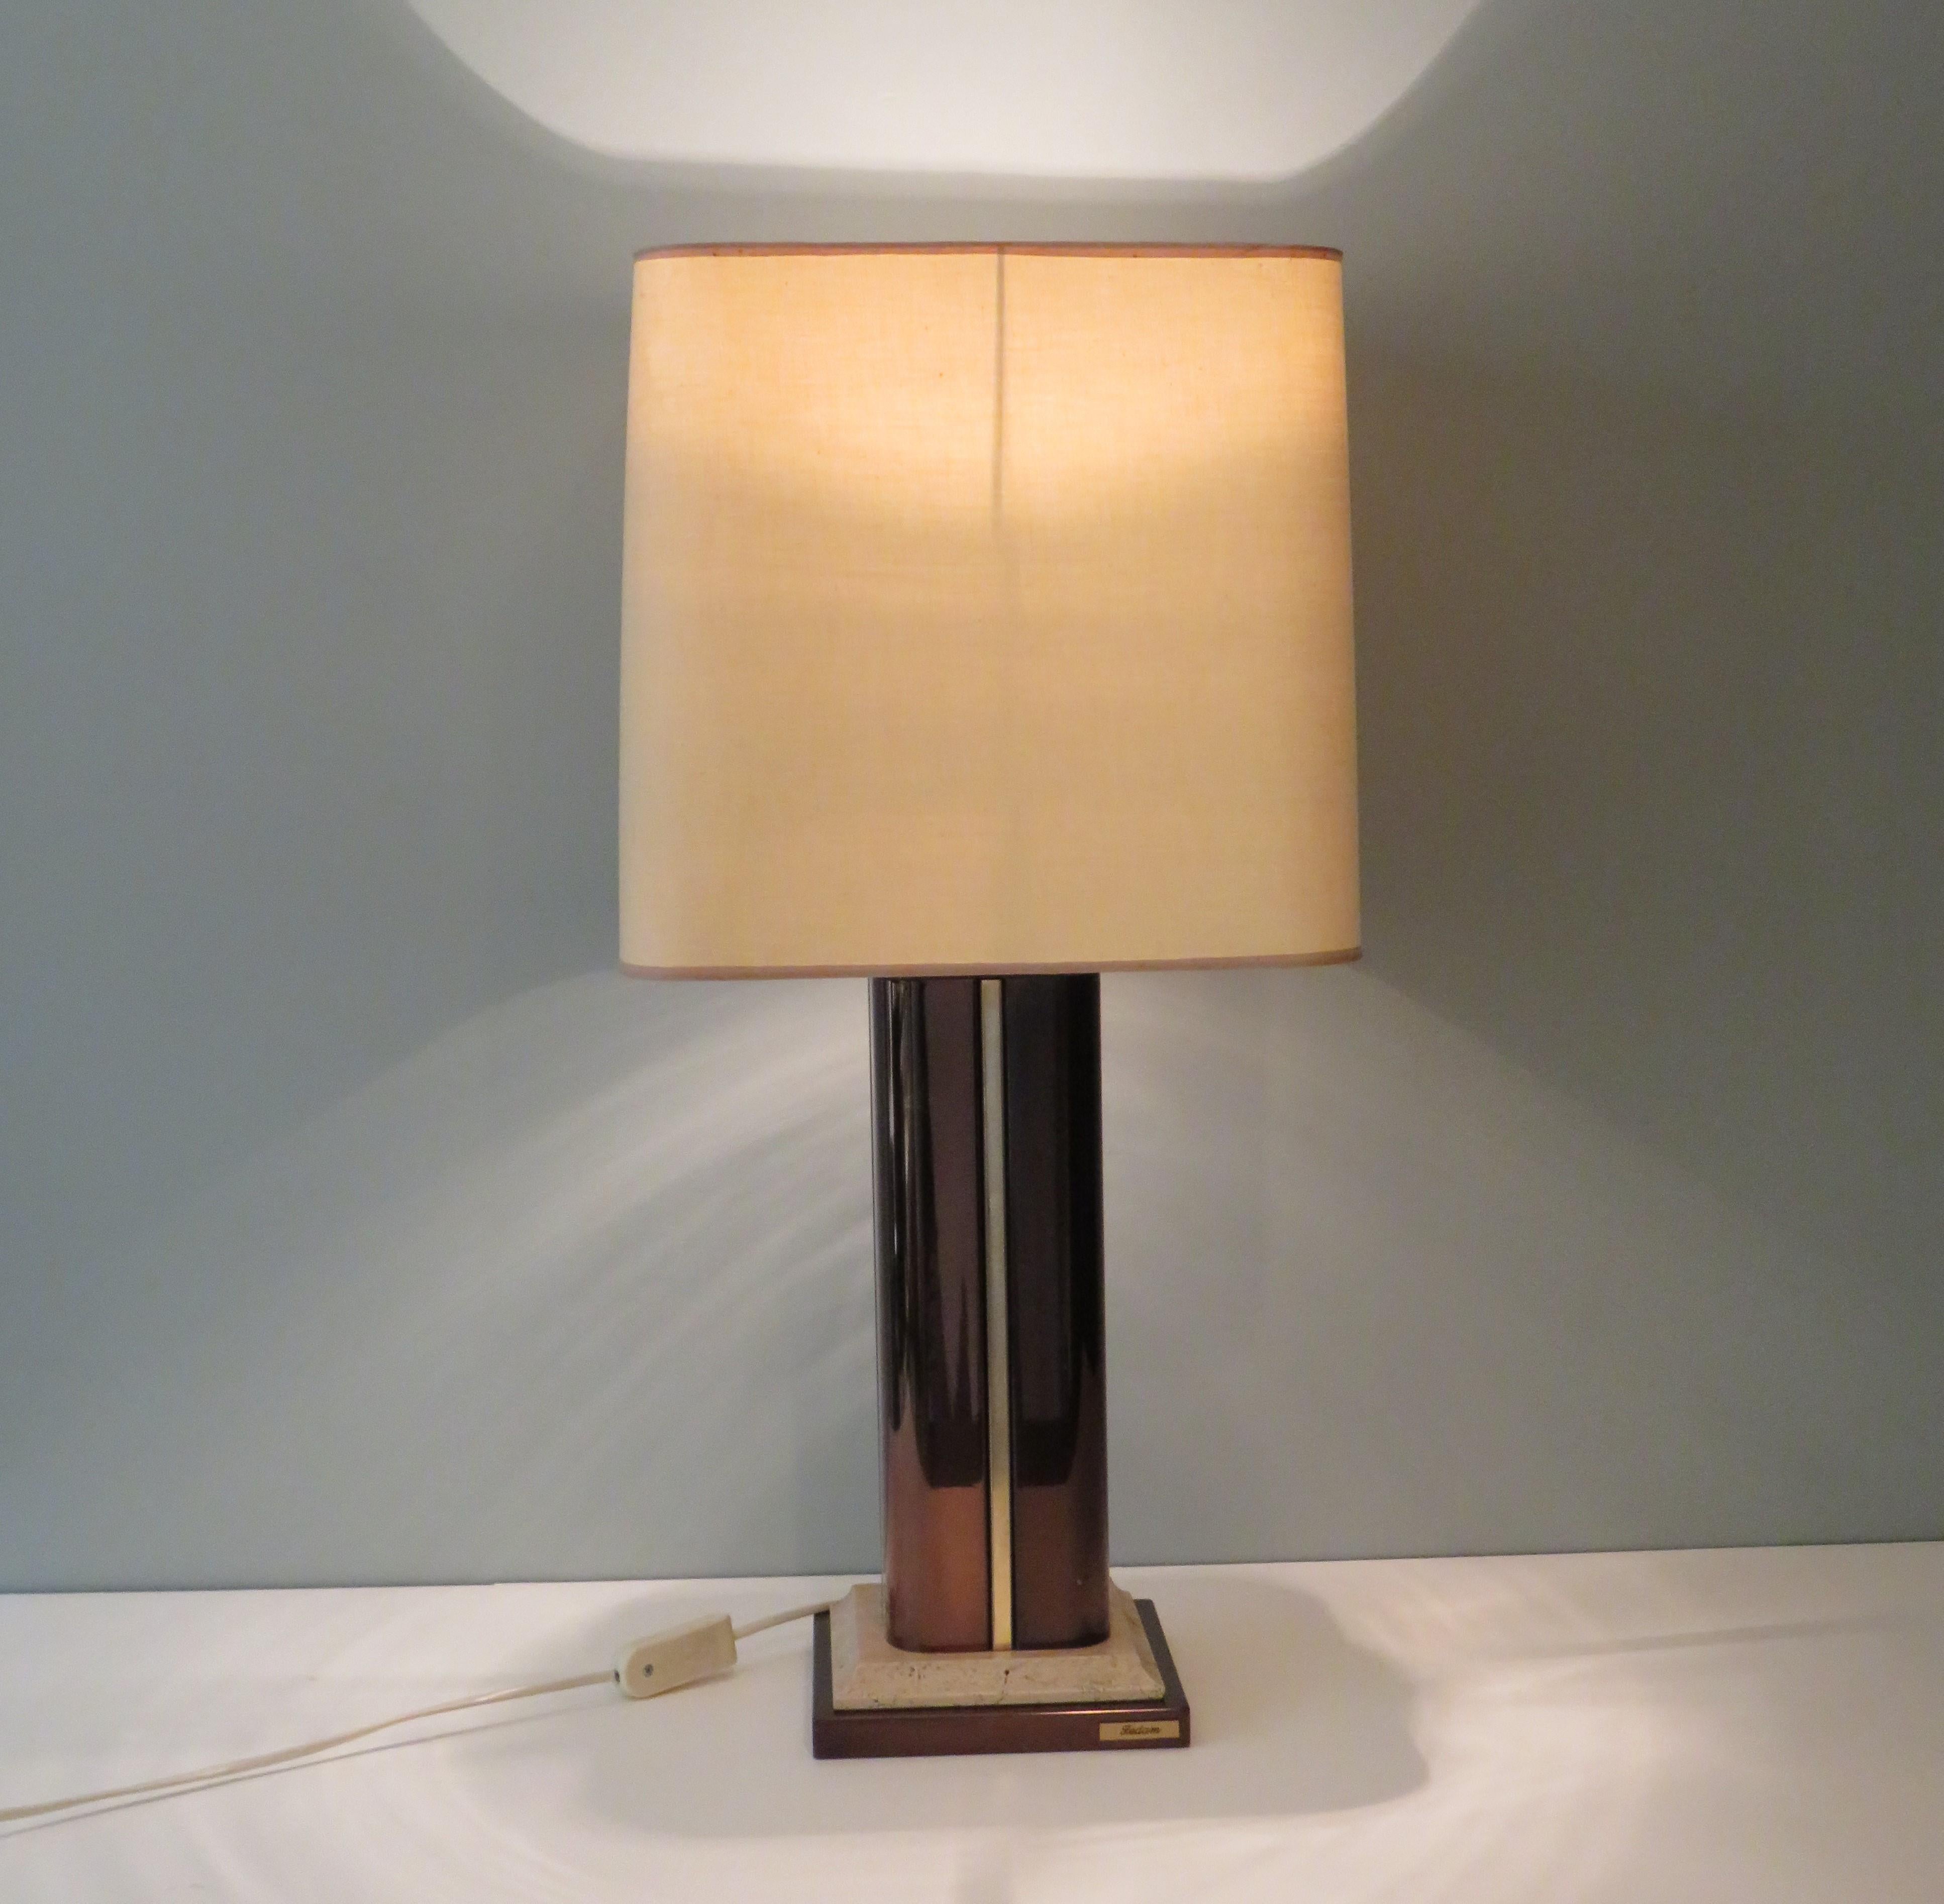 Stylish table lamp by Fedam, base made brass and travertine marble and brown lacquered metal with gold plated details. Beautiful light ecru colored square shade.
The lamp is provided with a E 27 fitting and an on and off button.
The dimensions: